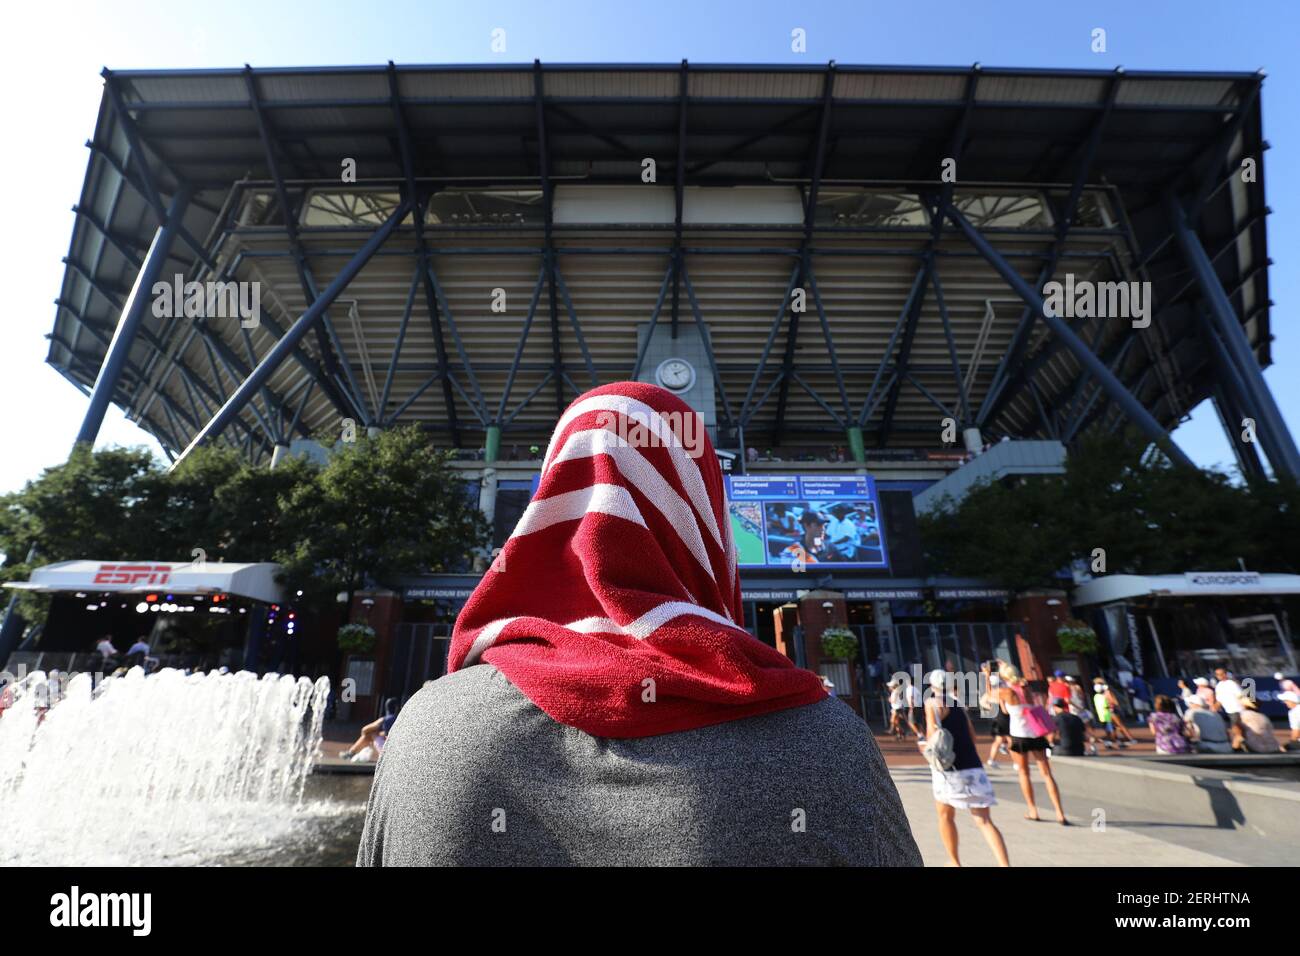 With temperatures reaching above ninety degrees, a man wears a damp towel  over his head to keep himself cool as he watches tennis matches on big  screens at the 2018 US Open